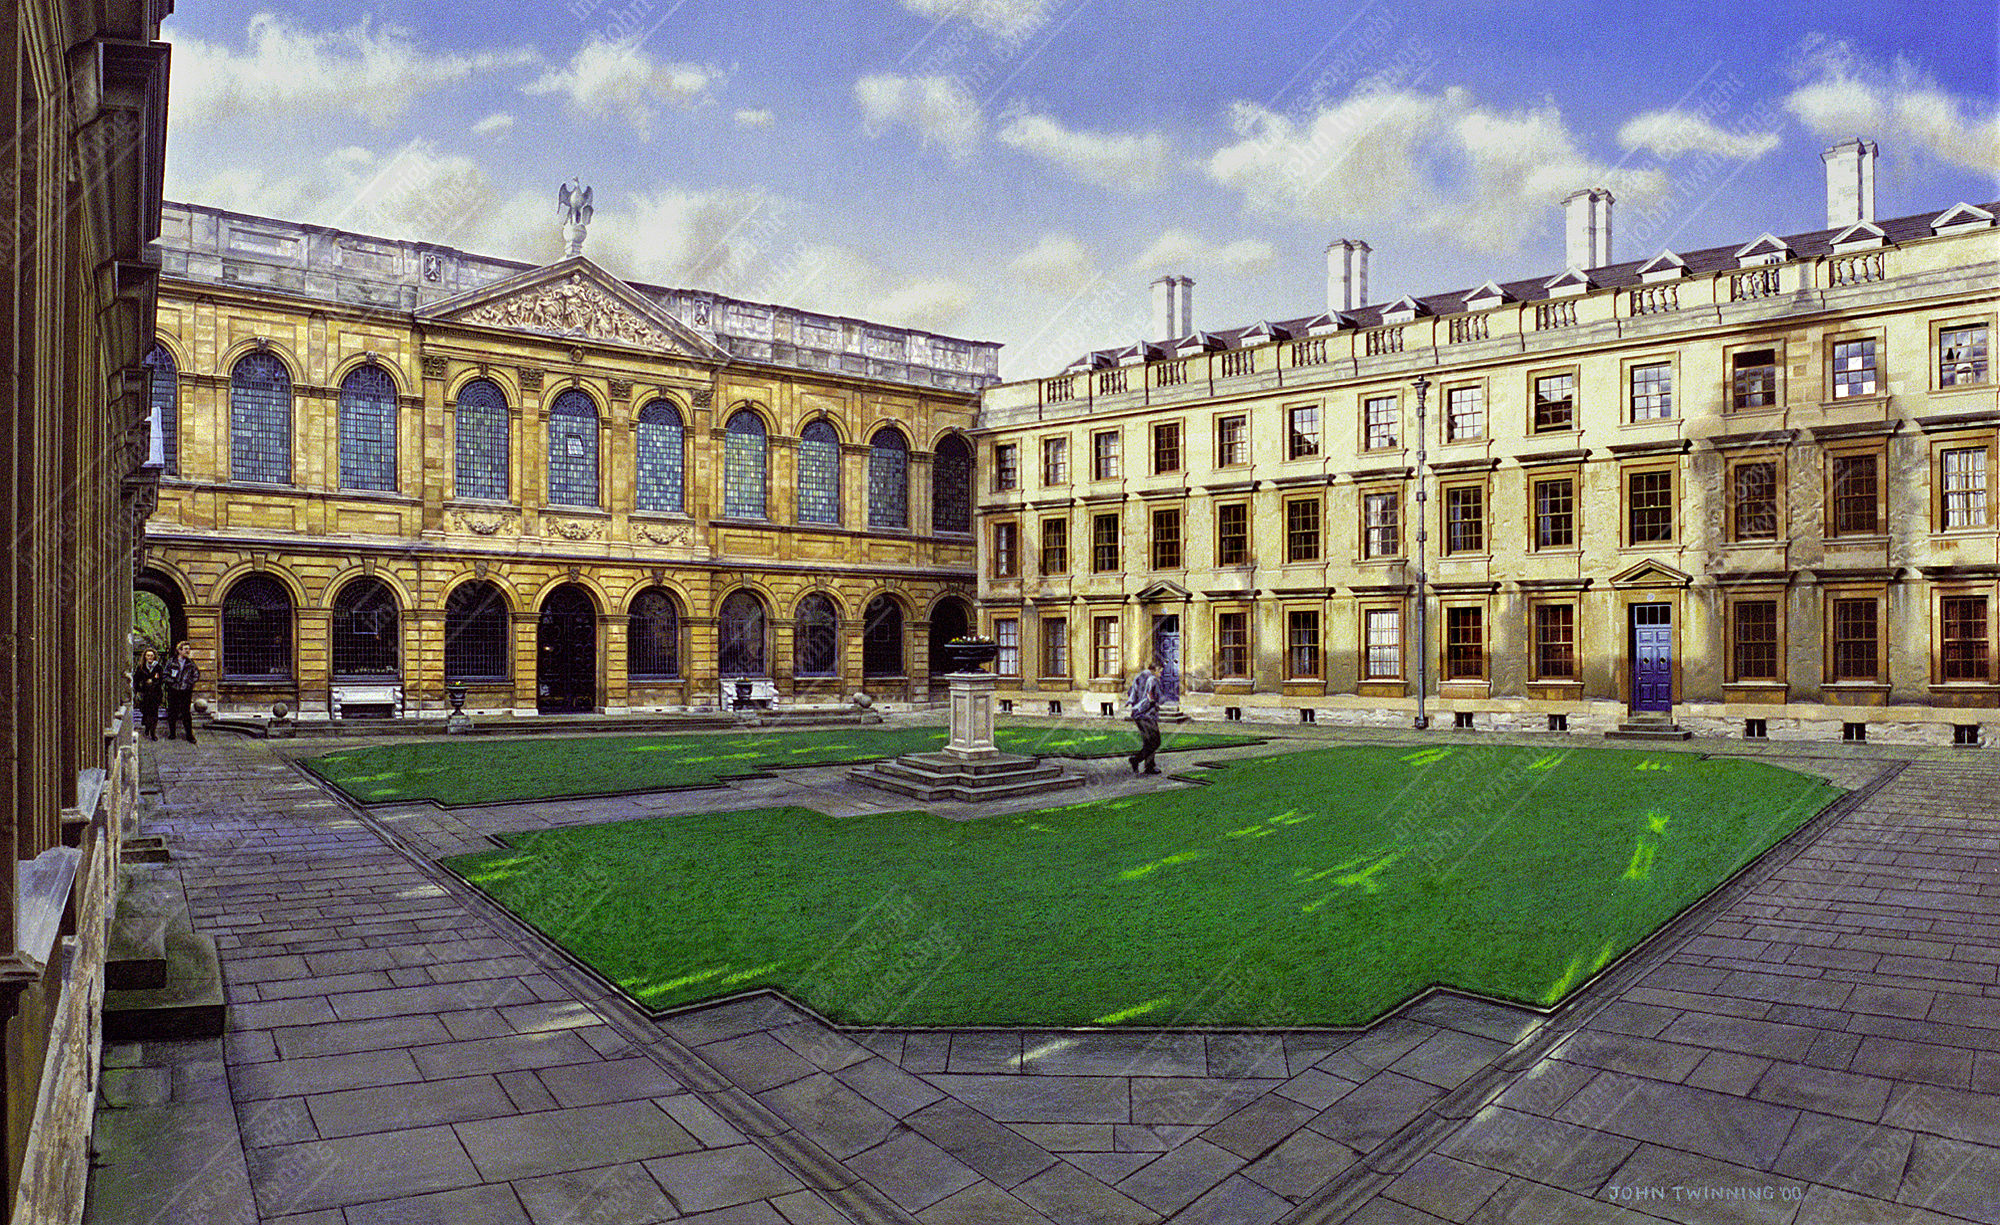 'The Back Quad' - art print from a painting of this view within the grounds of the queen's college, oxford